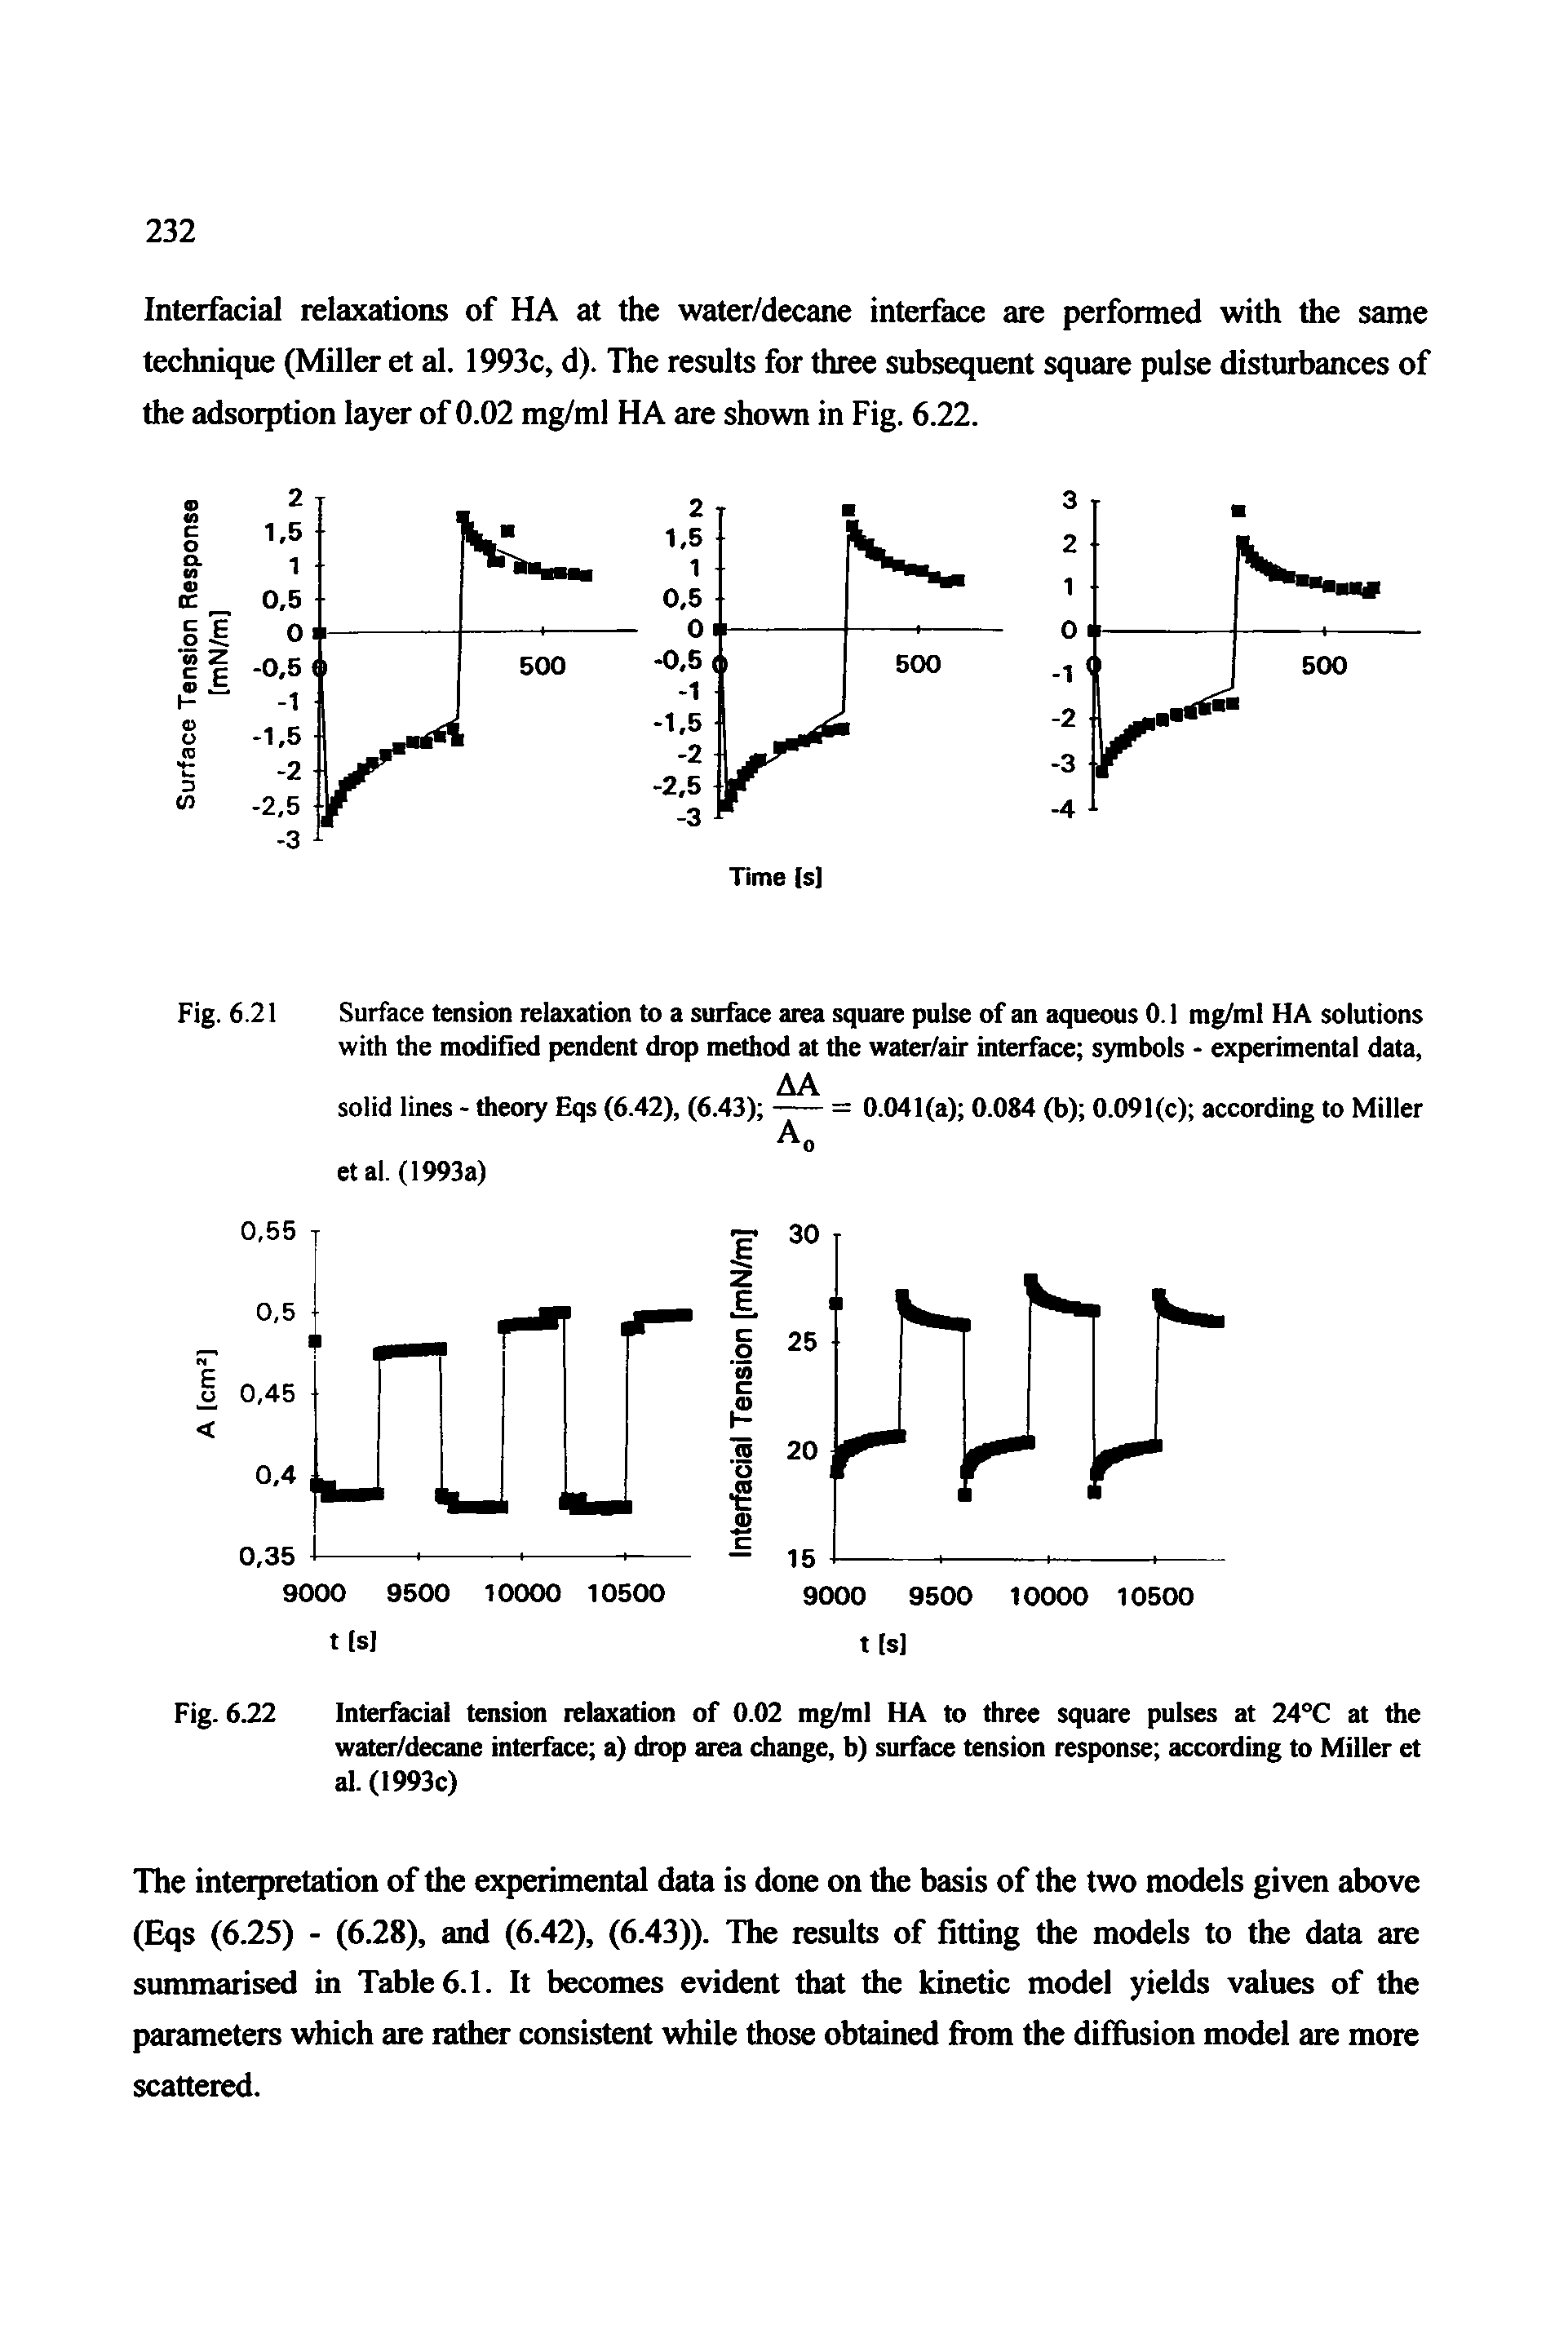 Fig. 6.22 Interfacial tension relaxation of 0.02 mg/ml HA to three square pulses at 24°C at the water/decane interface a) drop area change, b) surface tension response according to Miller et al. (1993c)...